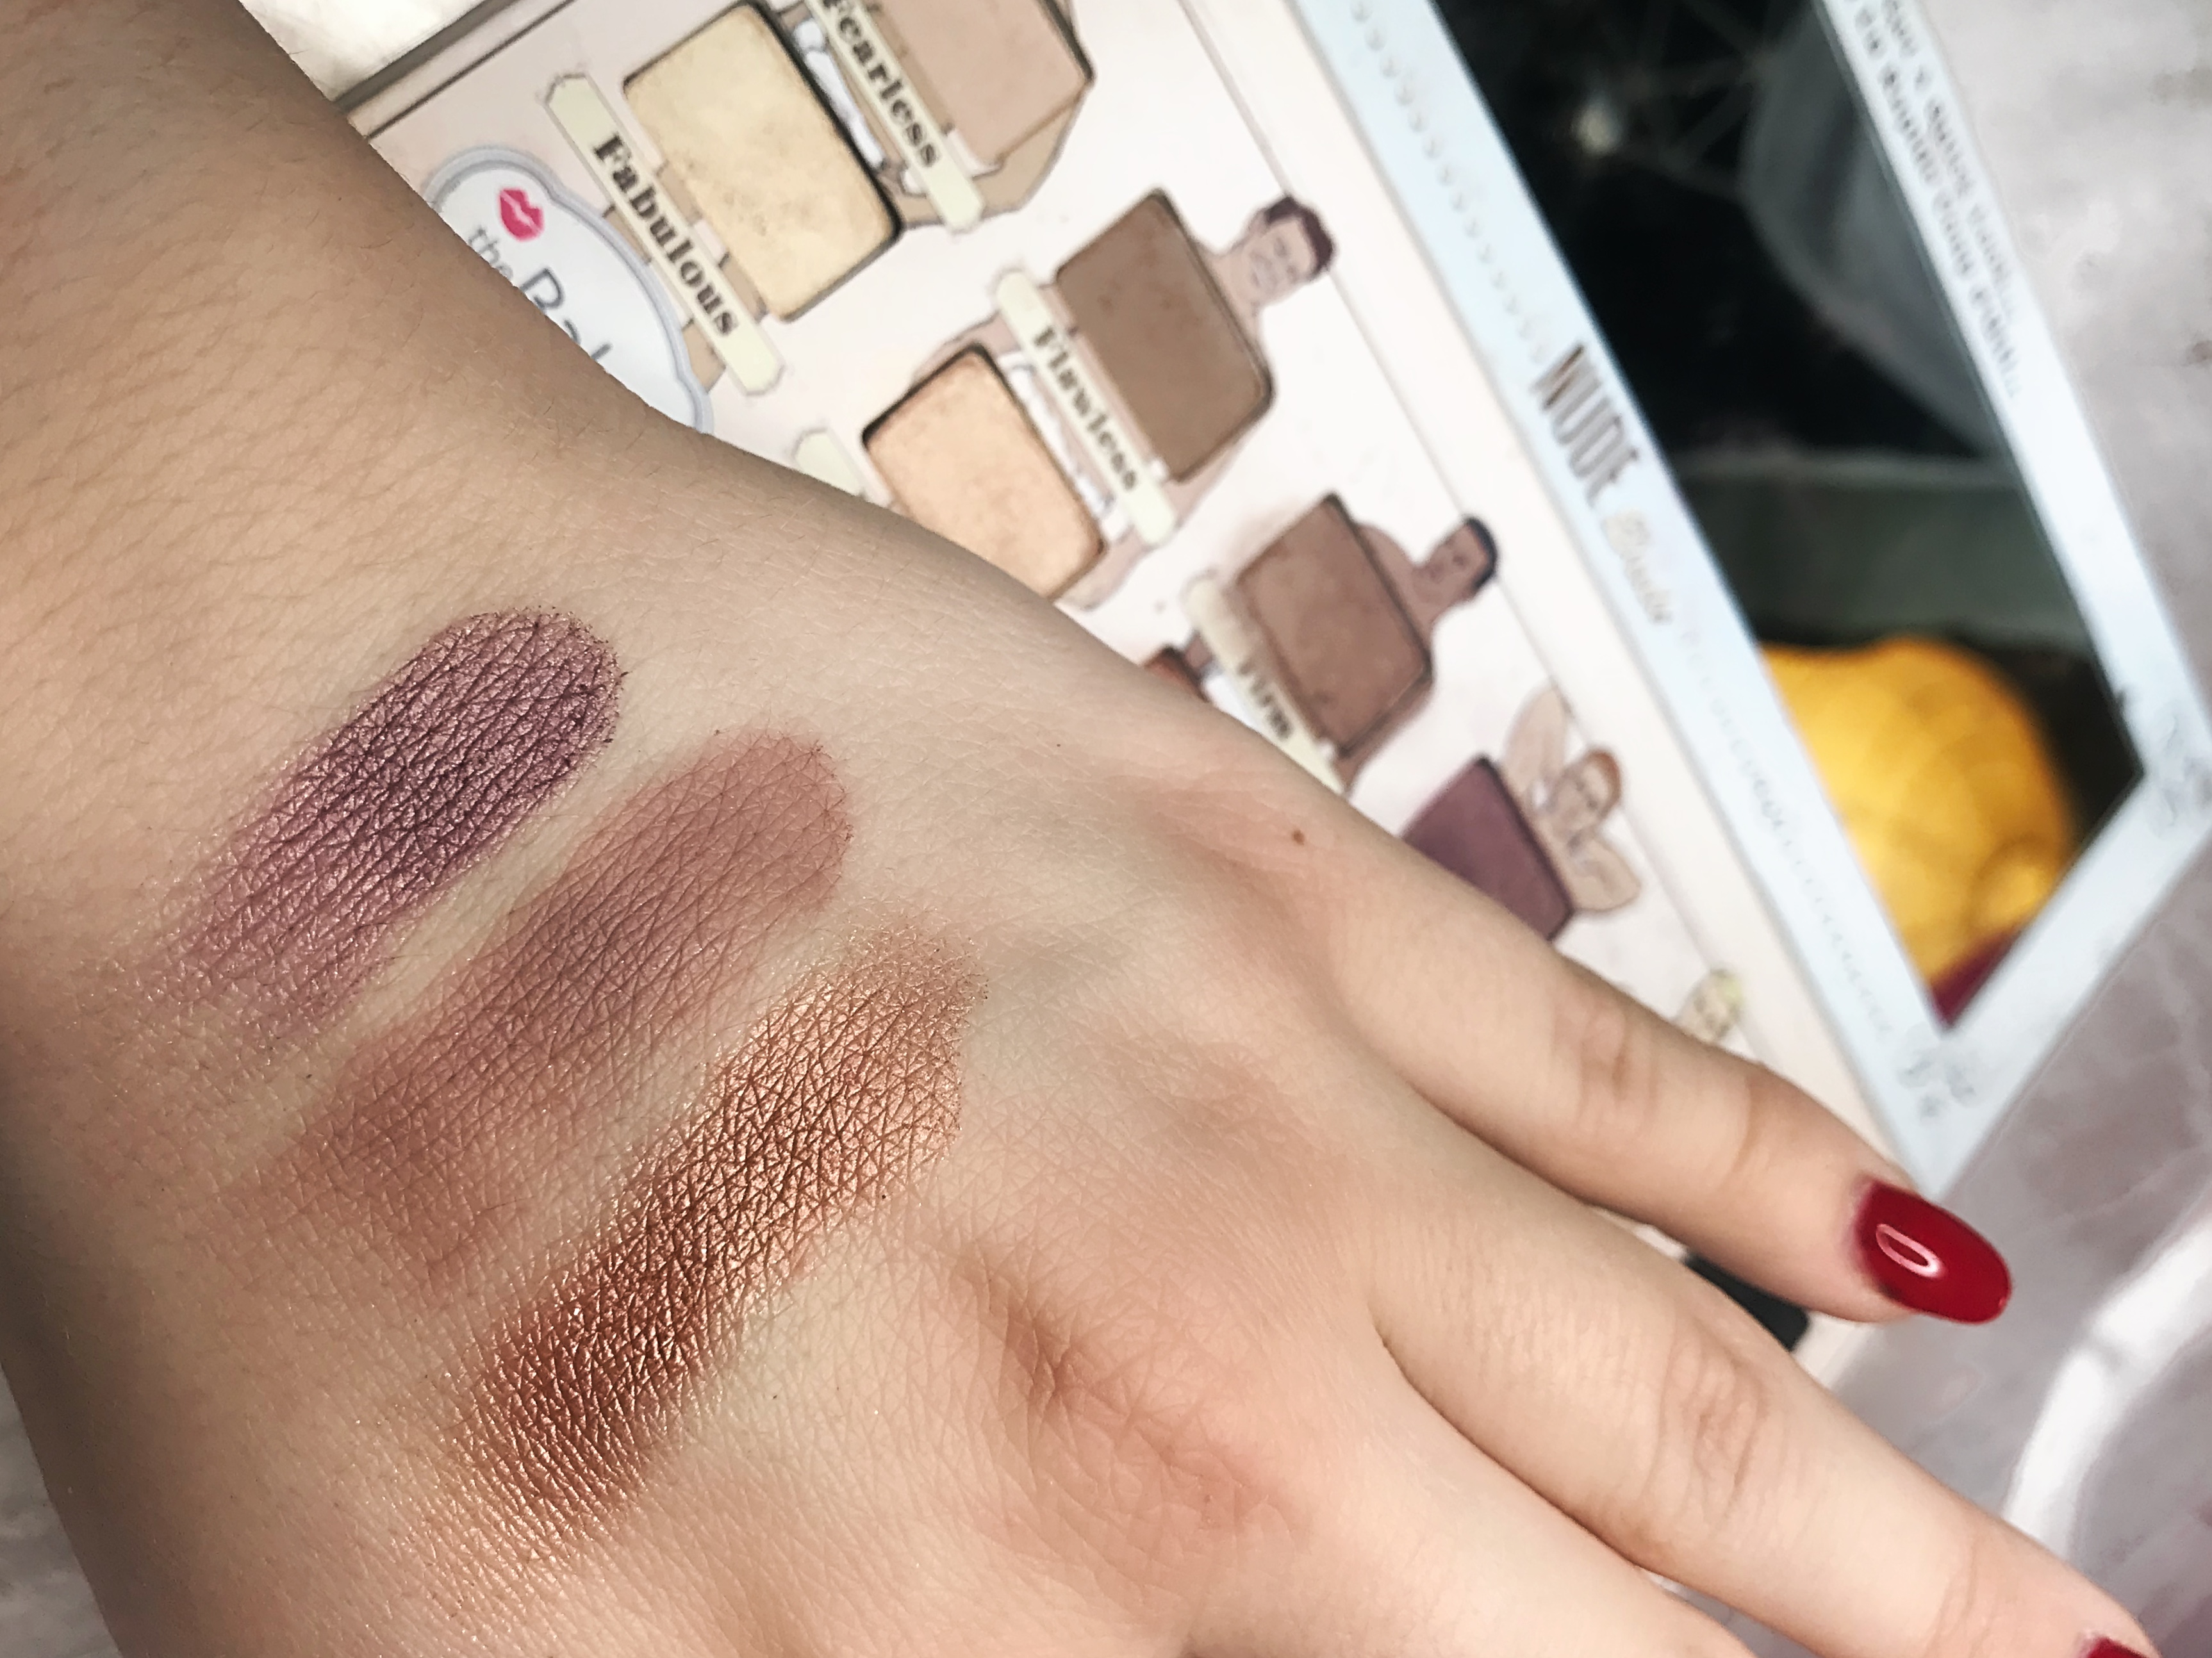 The balm nude dude swatches